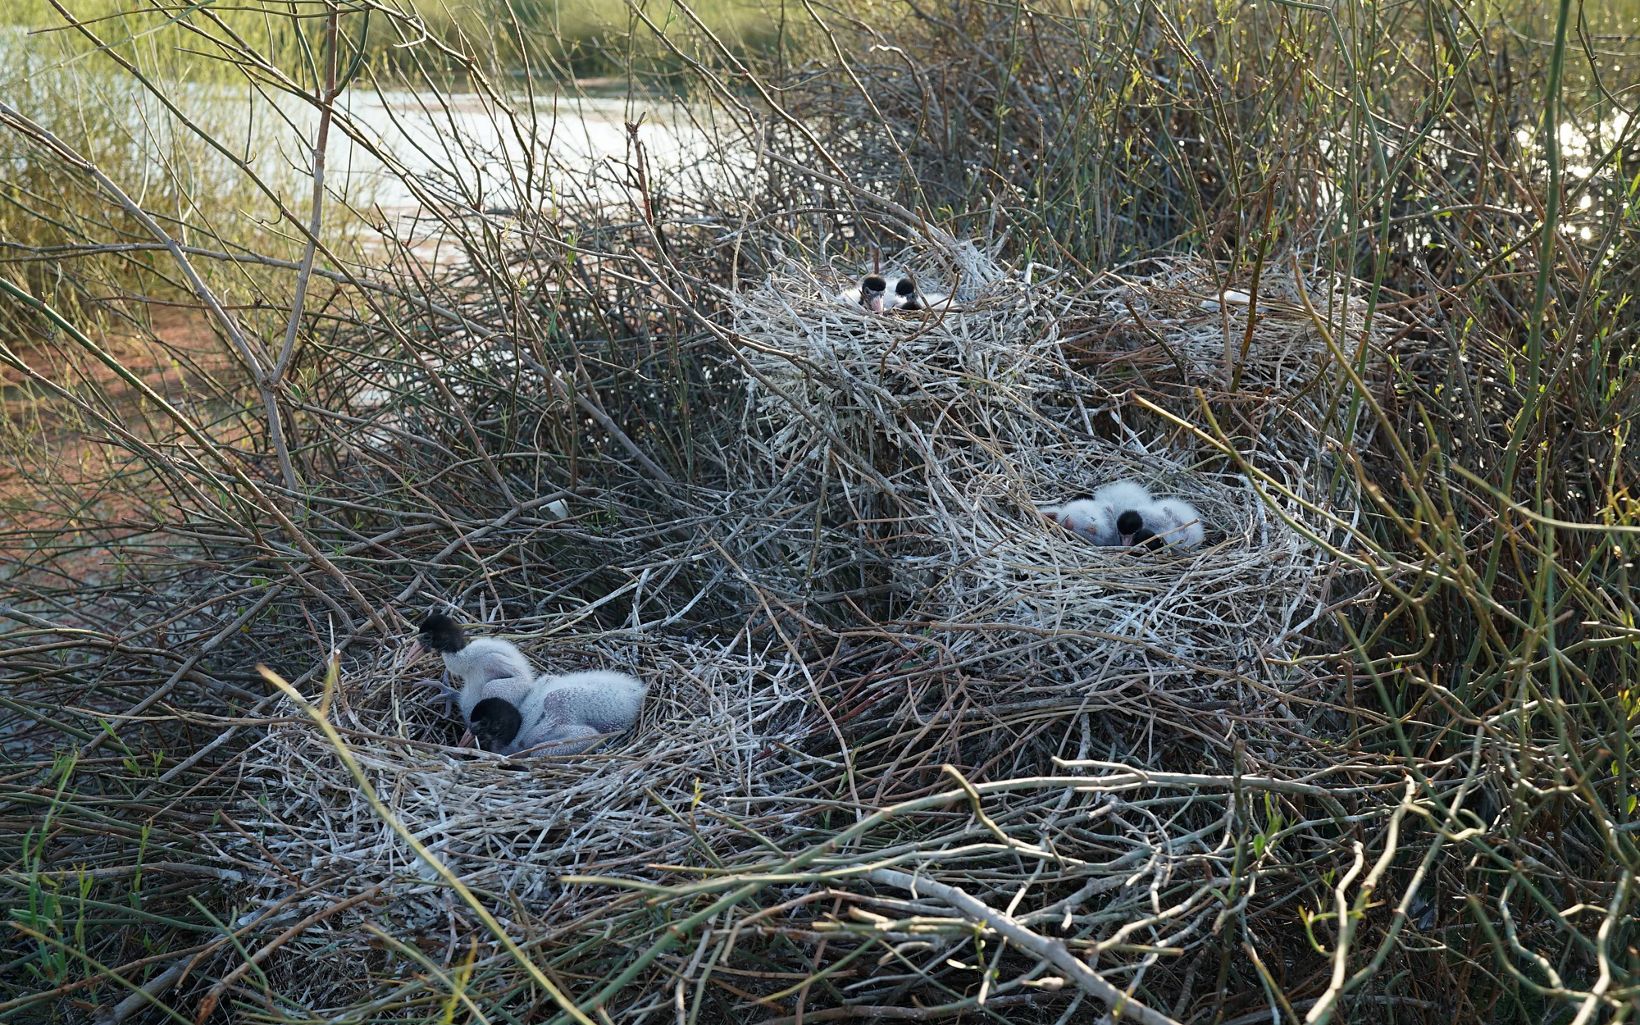 Australian White Ibis chicks in their nests at Gayini © Vince Bucello/Midstate Video Production